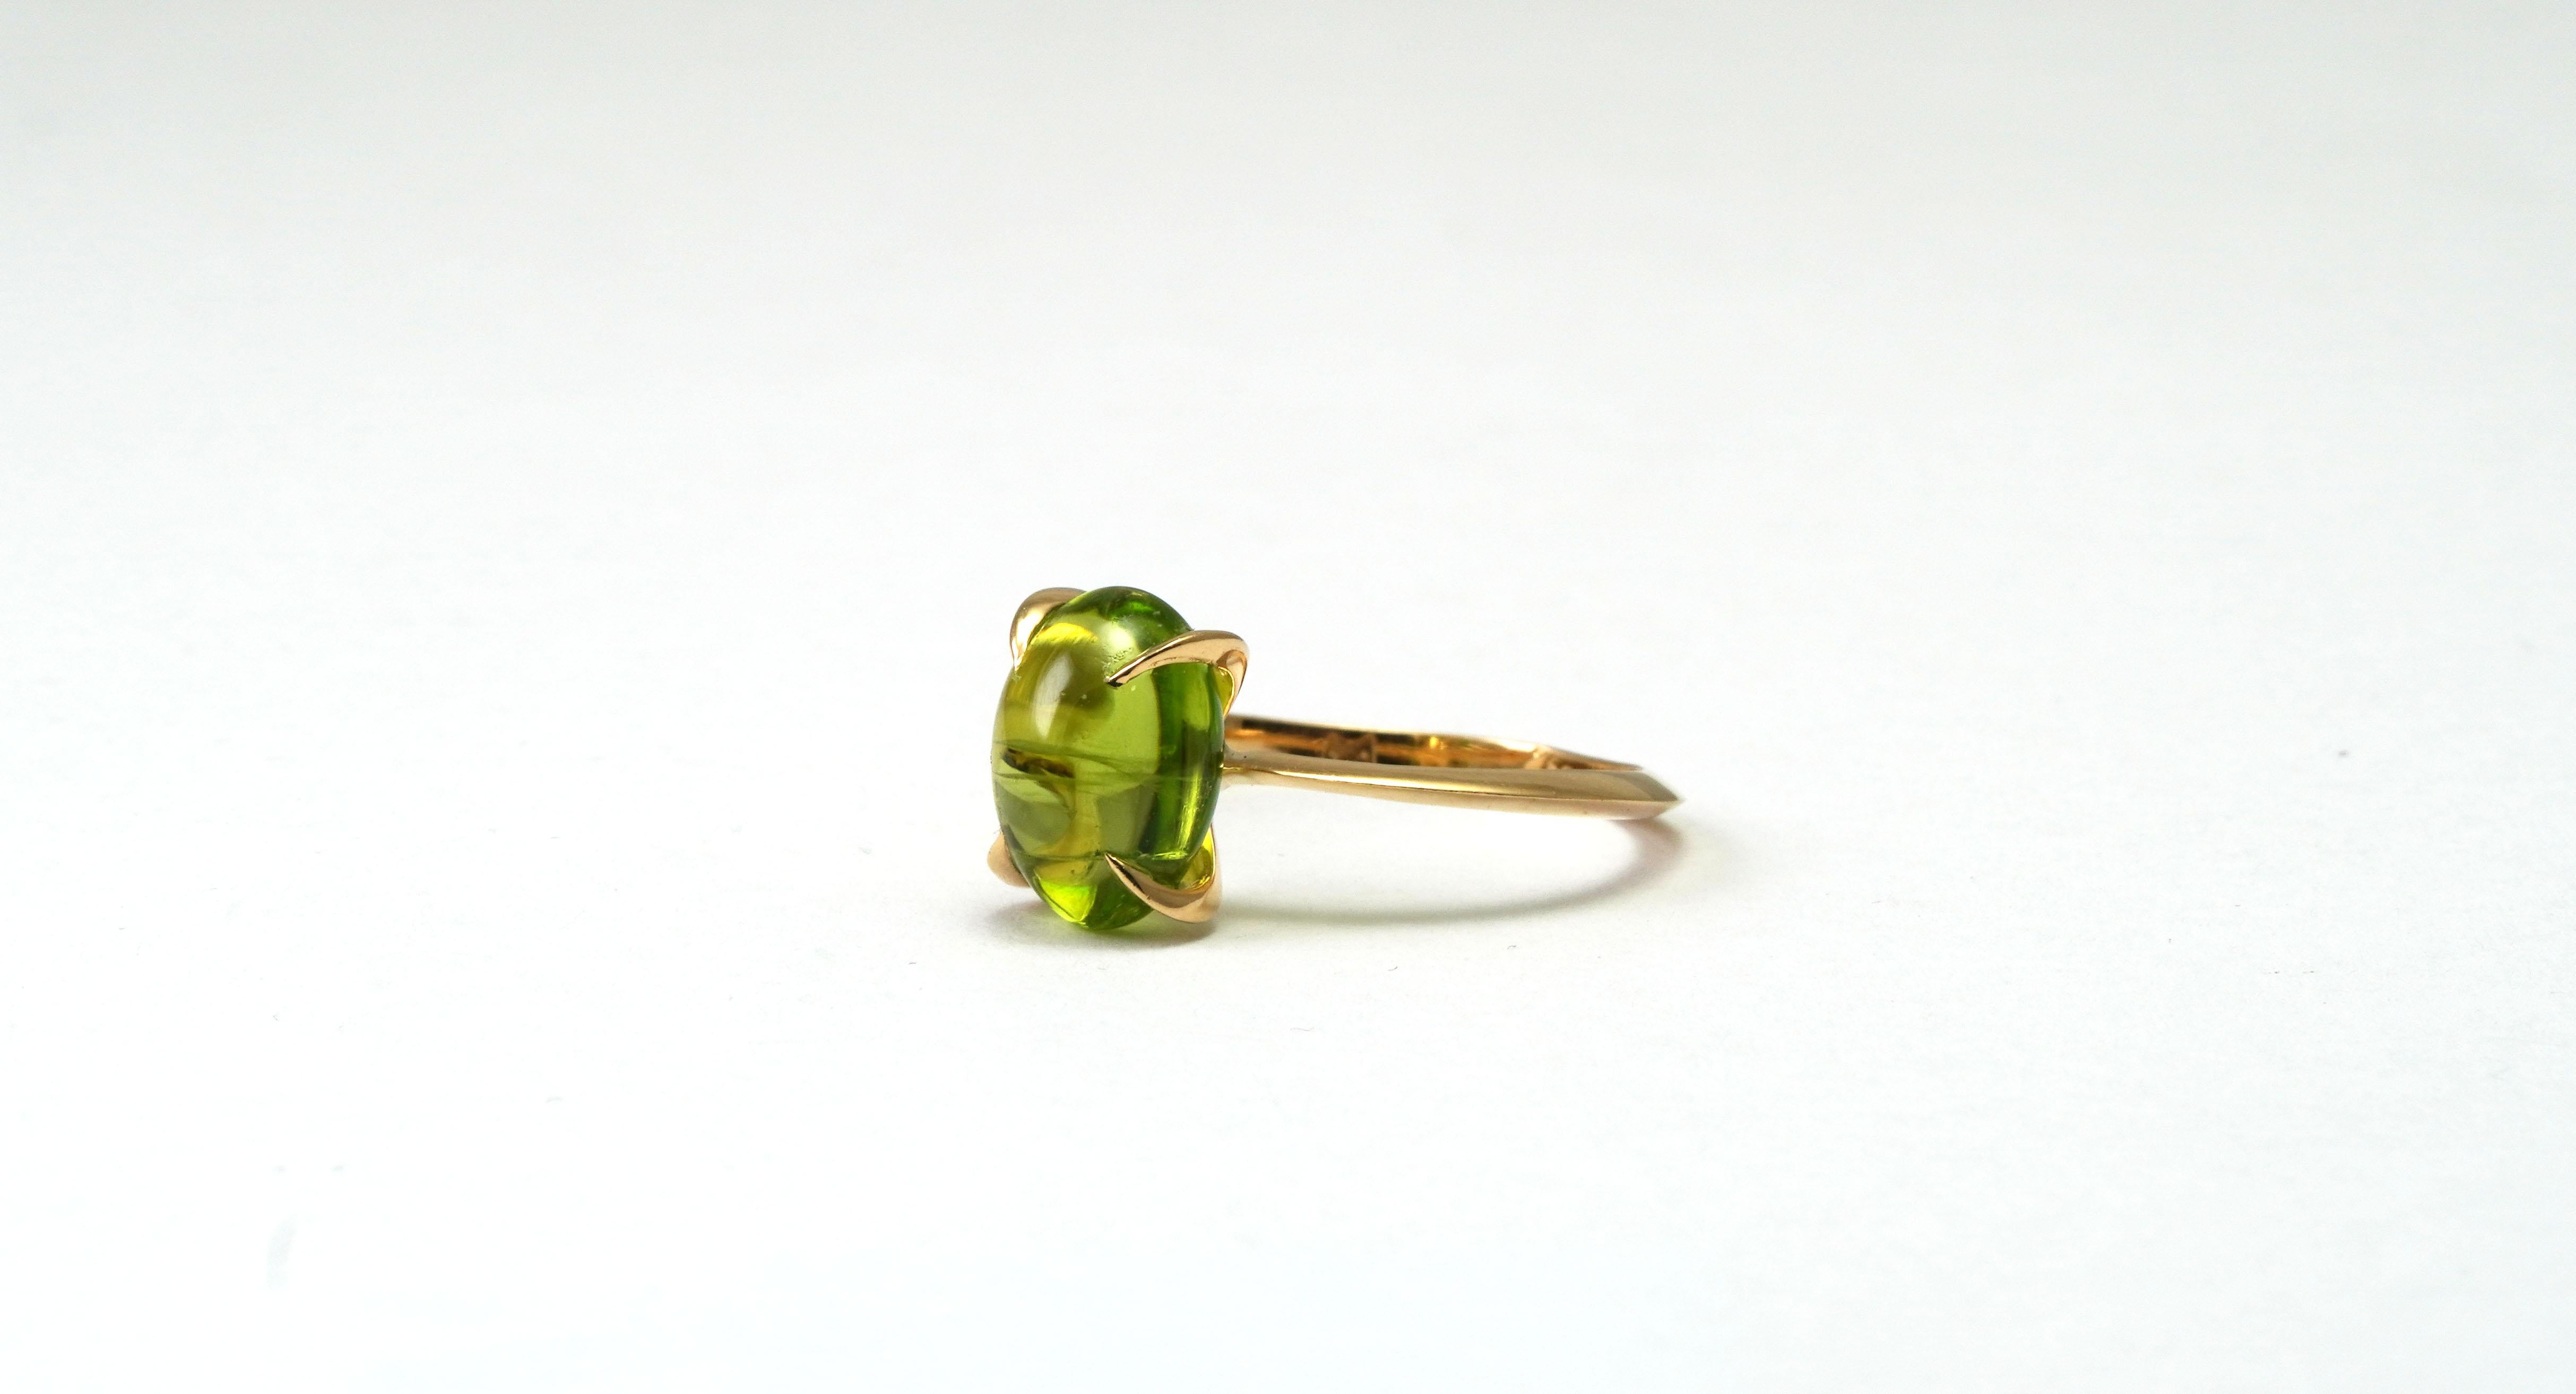 18 kt Gold ring with Peridot
Gold color: Yellow
Ring size: 5 1/2 US
Total weight: 2.24 grams

Set with:
- Peridot
Cut: Cabochon
Weight: 4.30 ct
Color: Green